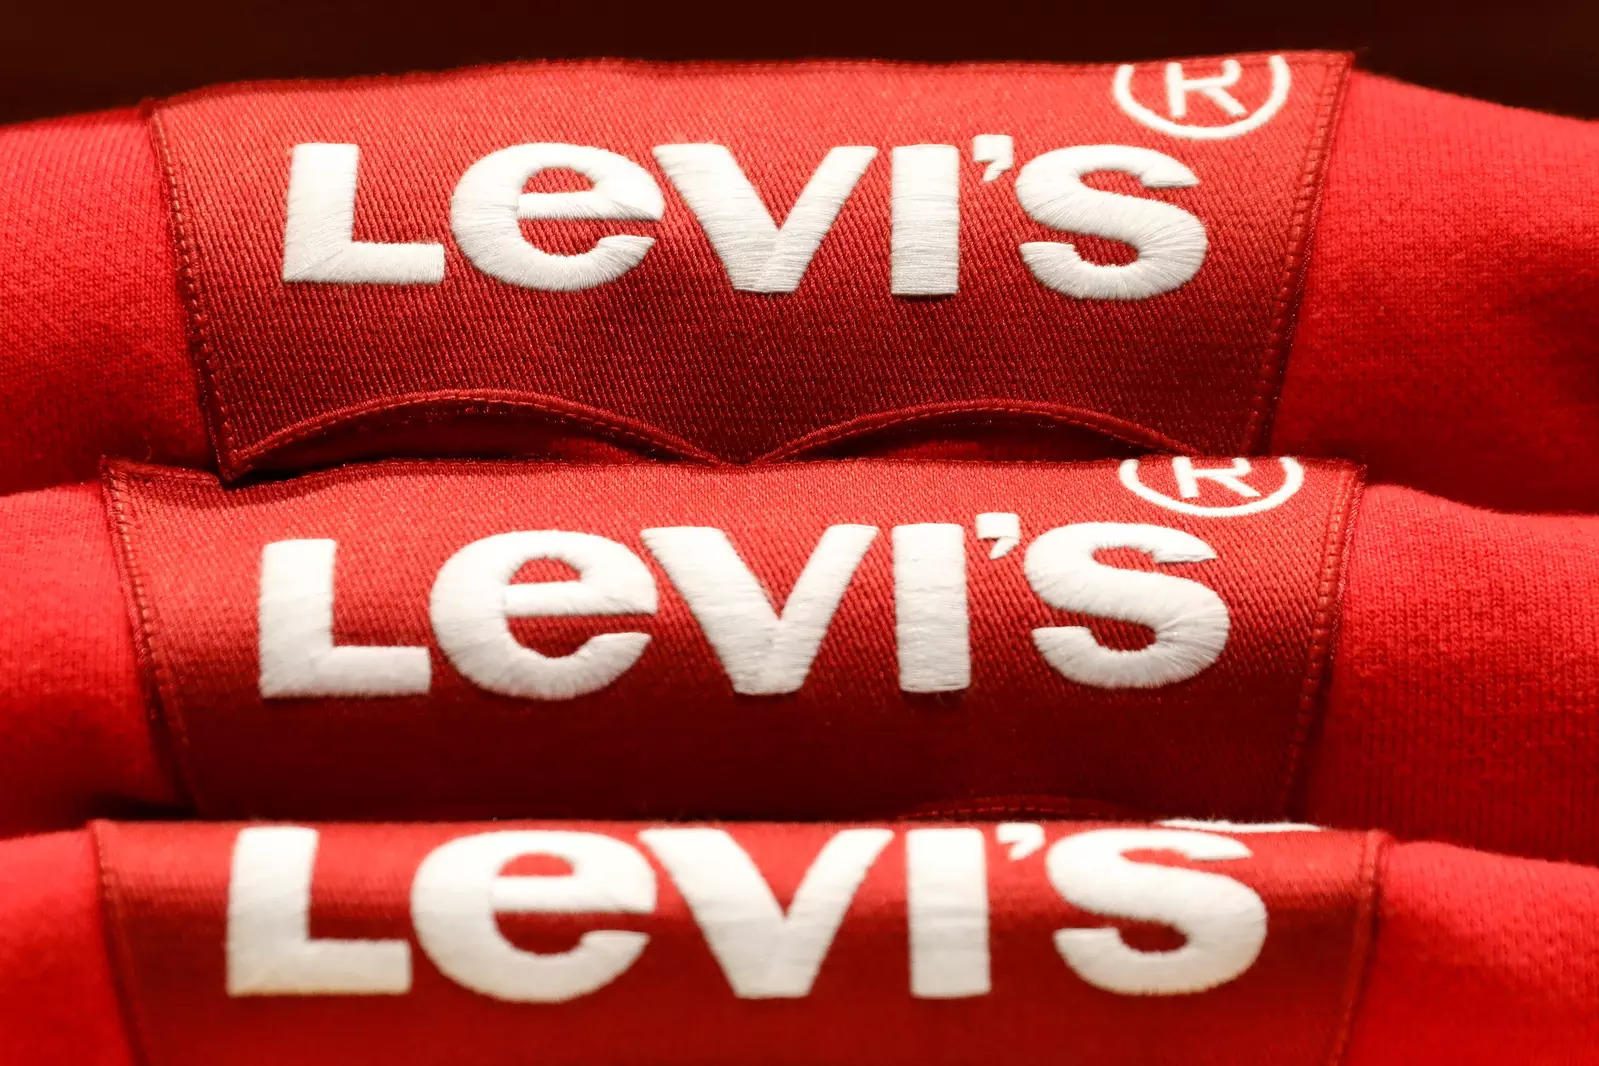 India fastest growing market for Levi's in Asia - Times of India